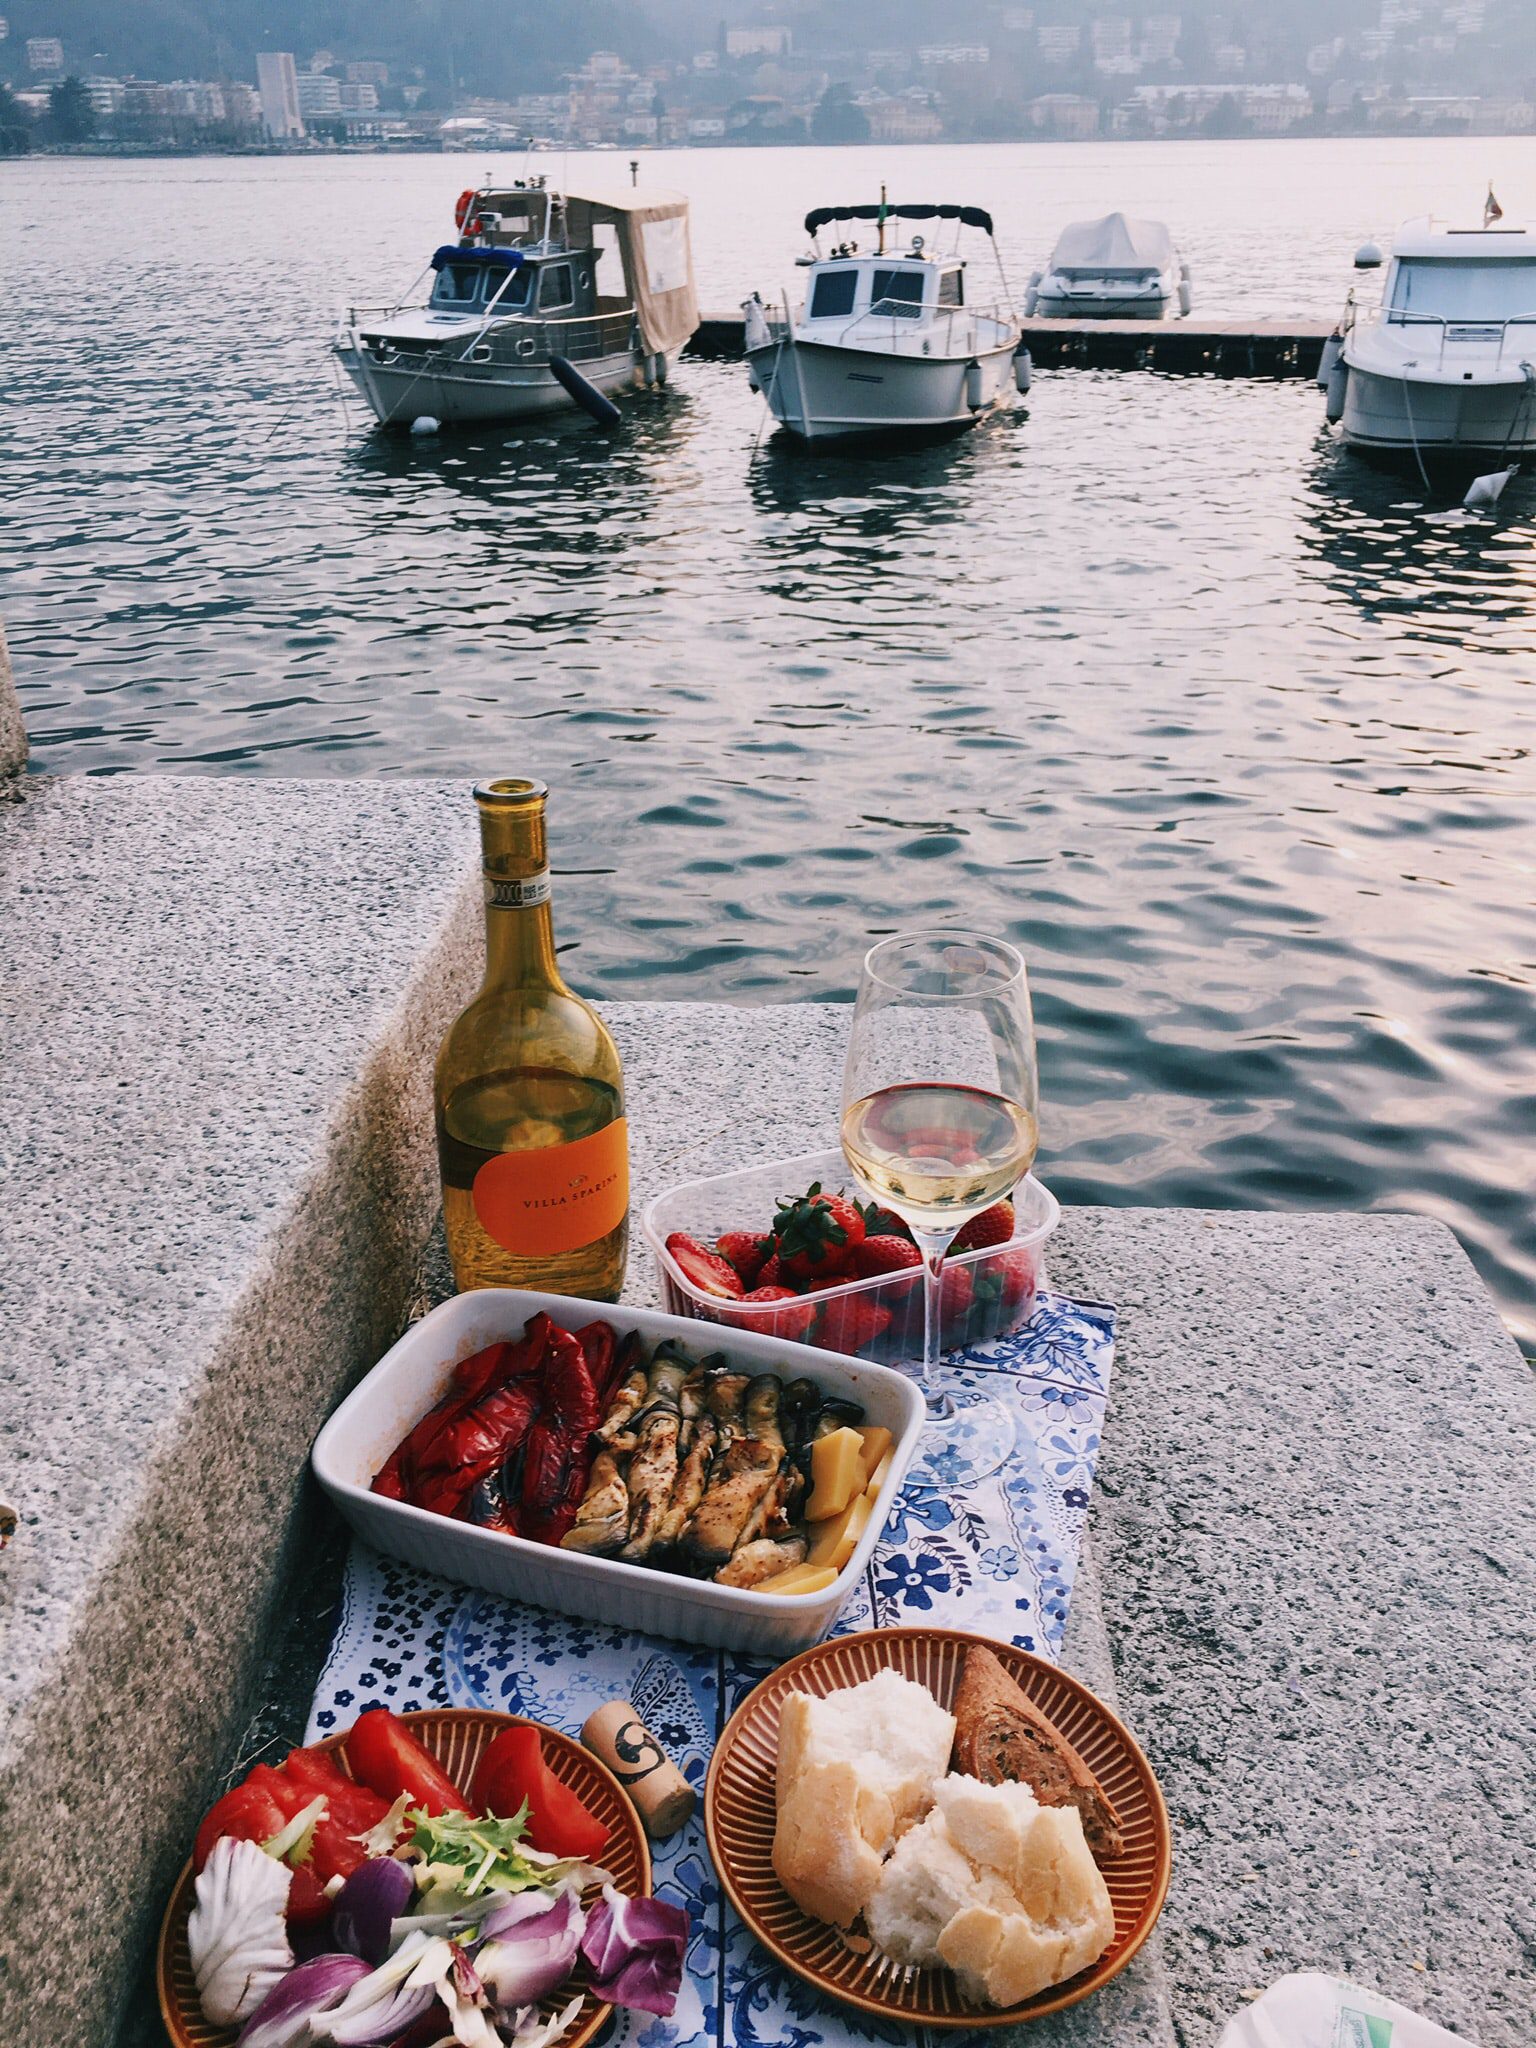 A picnic of roasted vegetables, bread, salad, strawberries and a bottle of white wine laid out on some steps overlooking a lake.